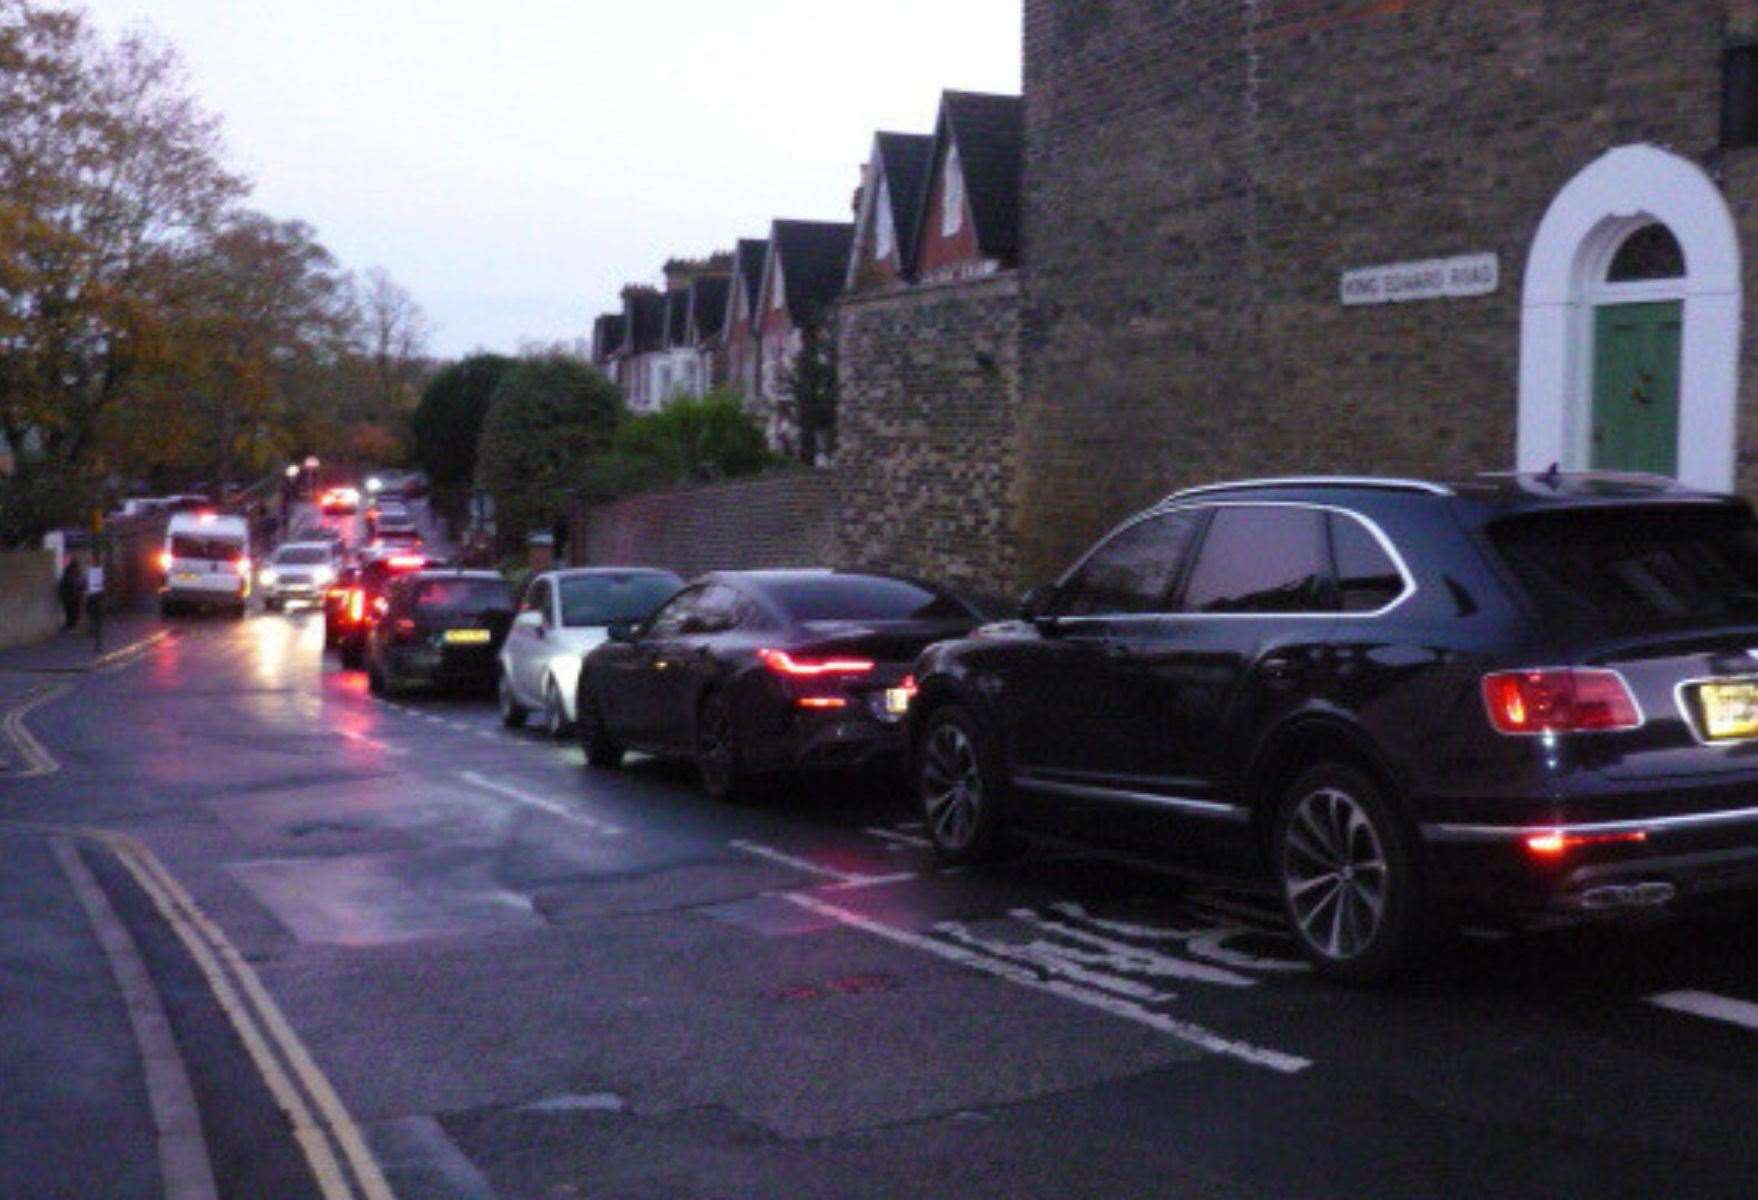 King’s School has apologised to residents for the parking. Picture: Lloyd Morgans